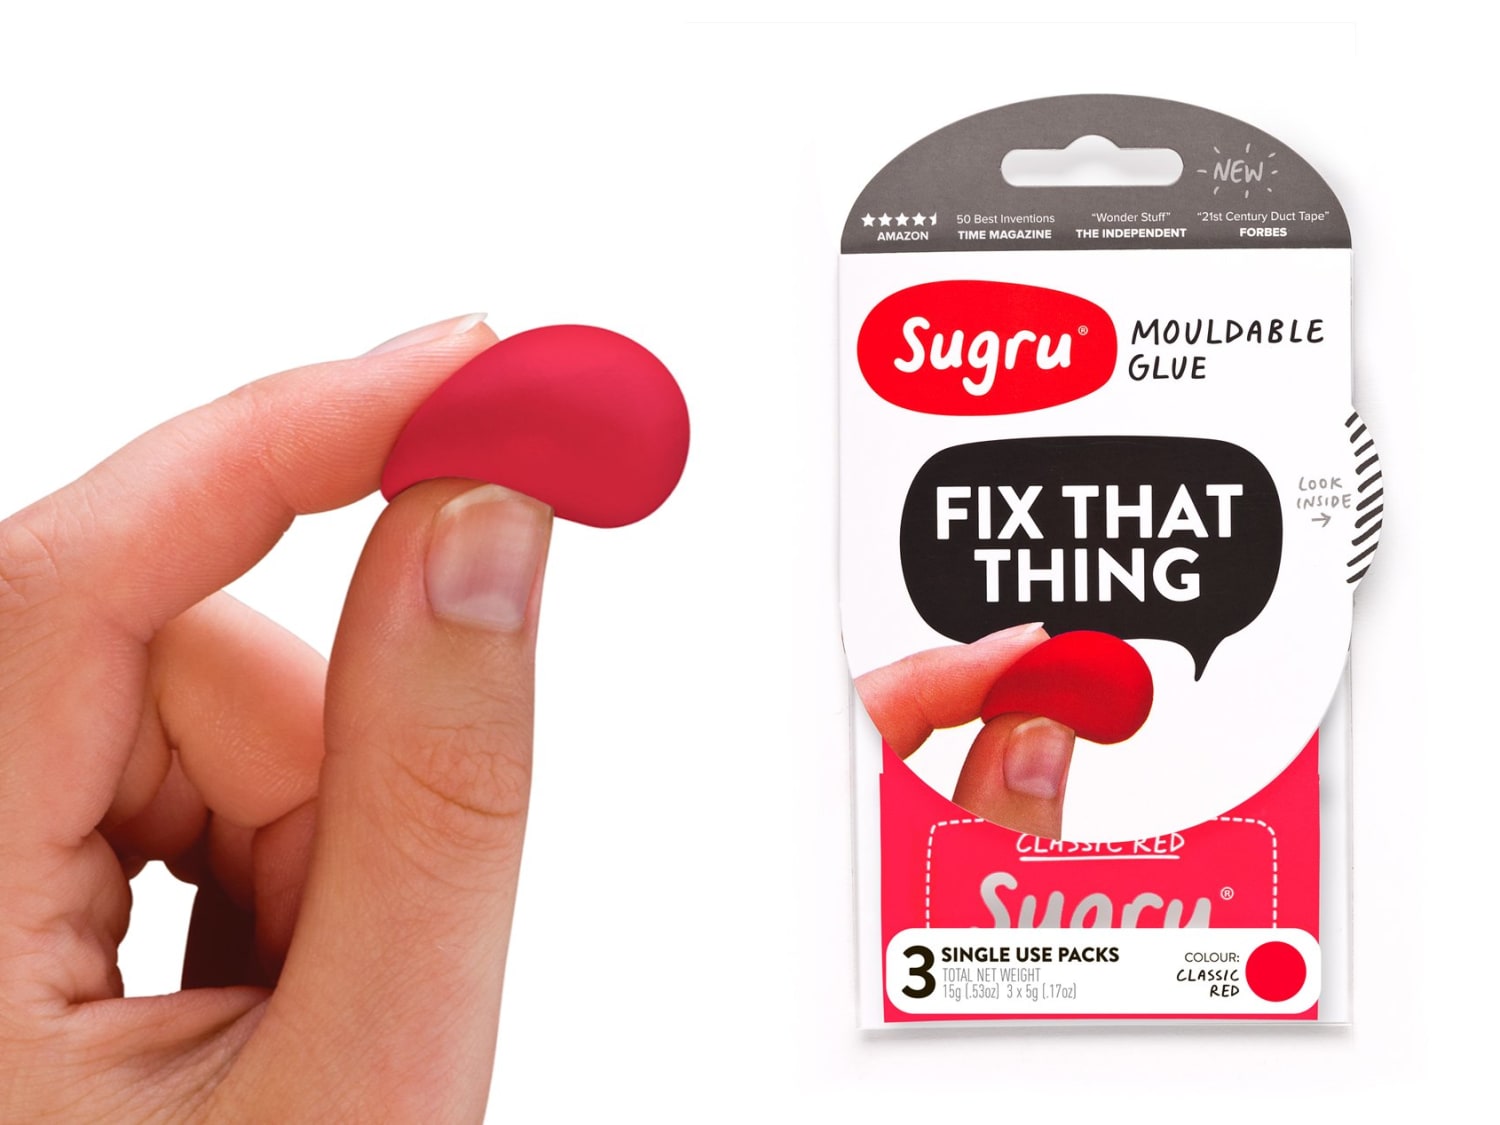 Sugru: The Most Handy DIY Tool You've Probably Never Heard Of